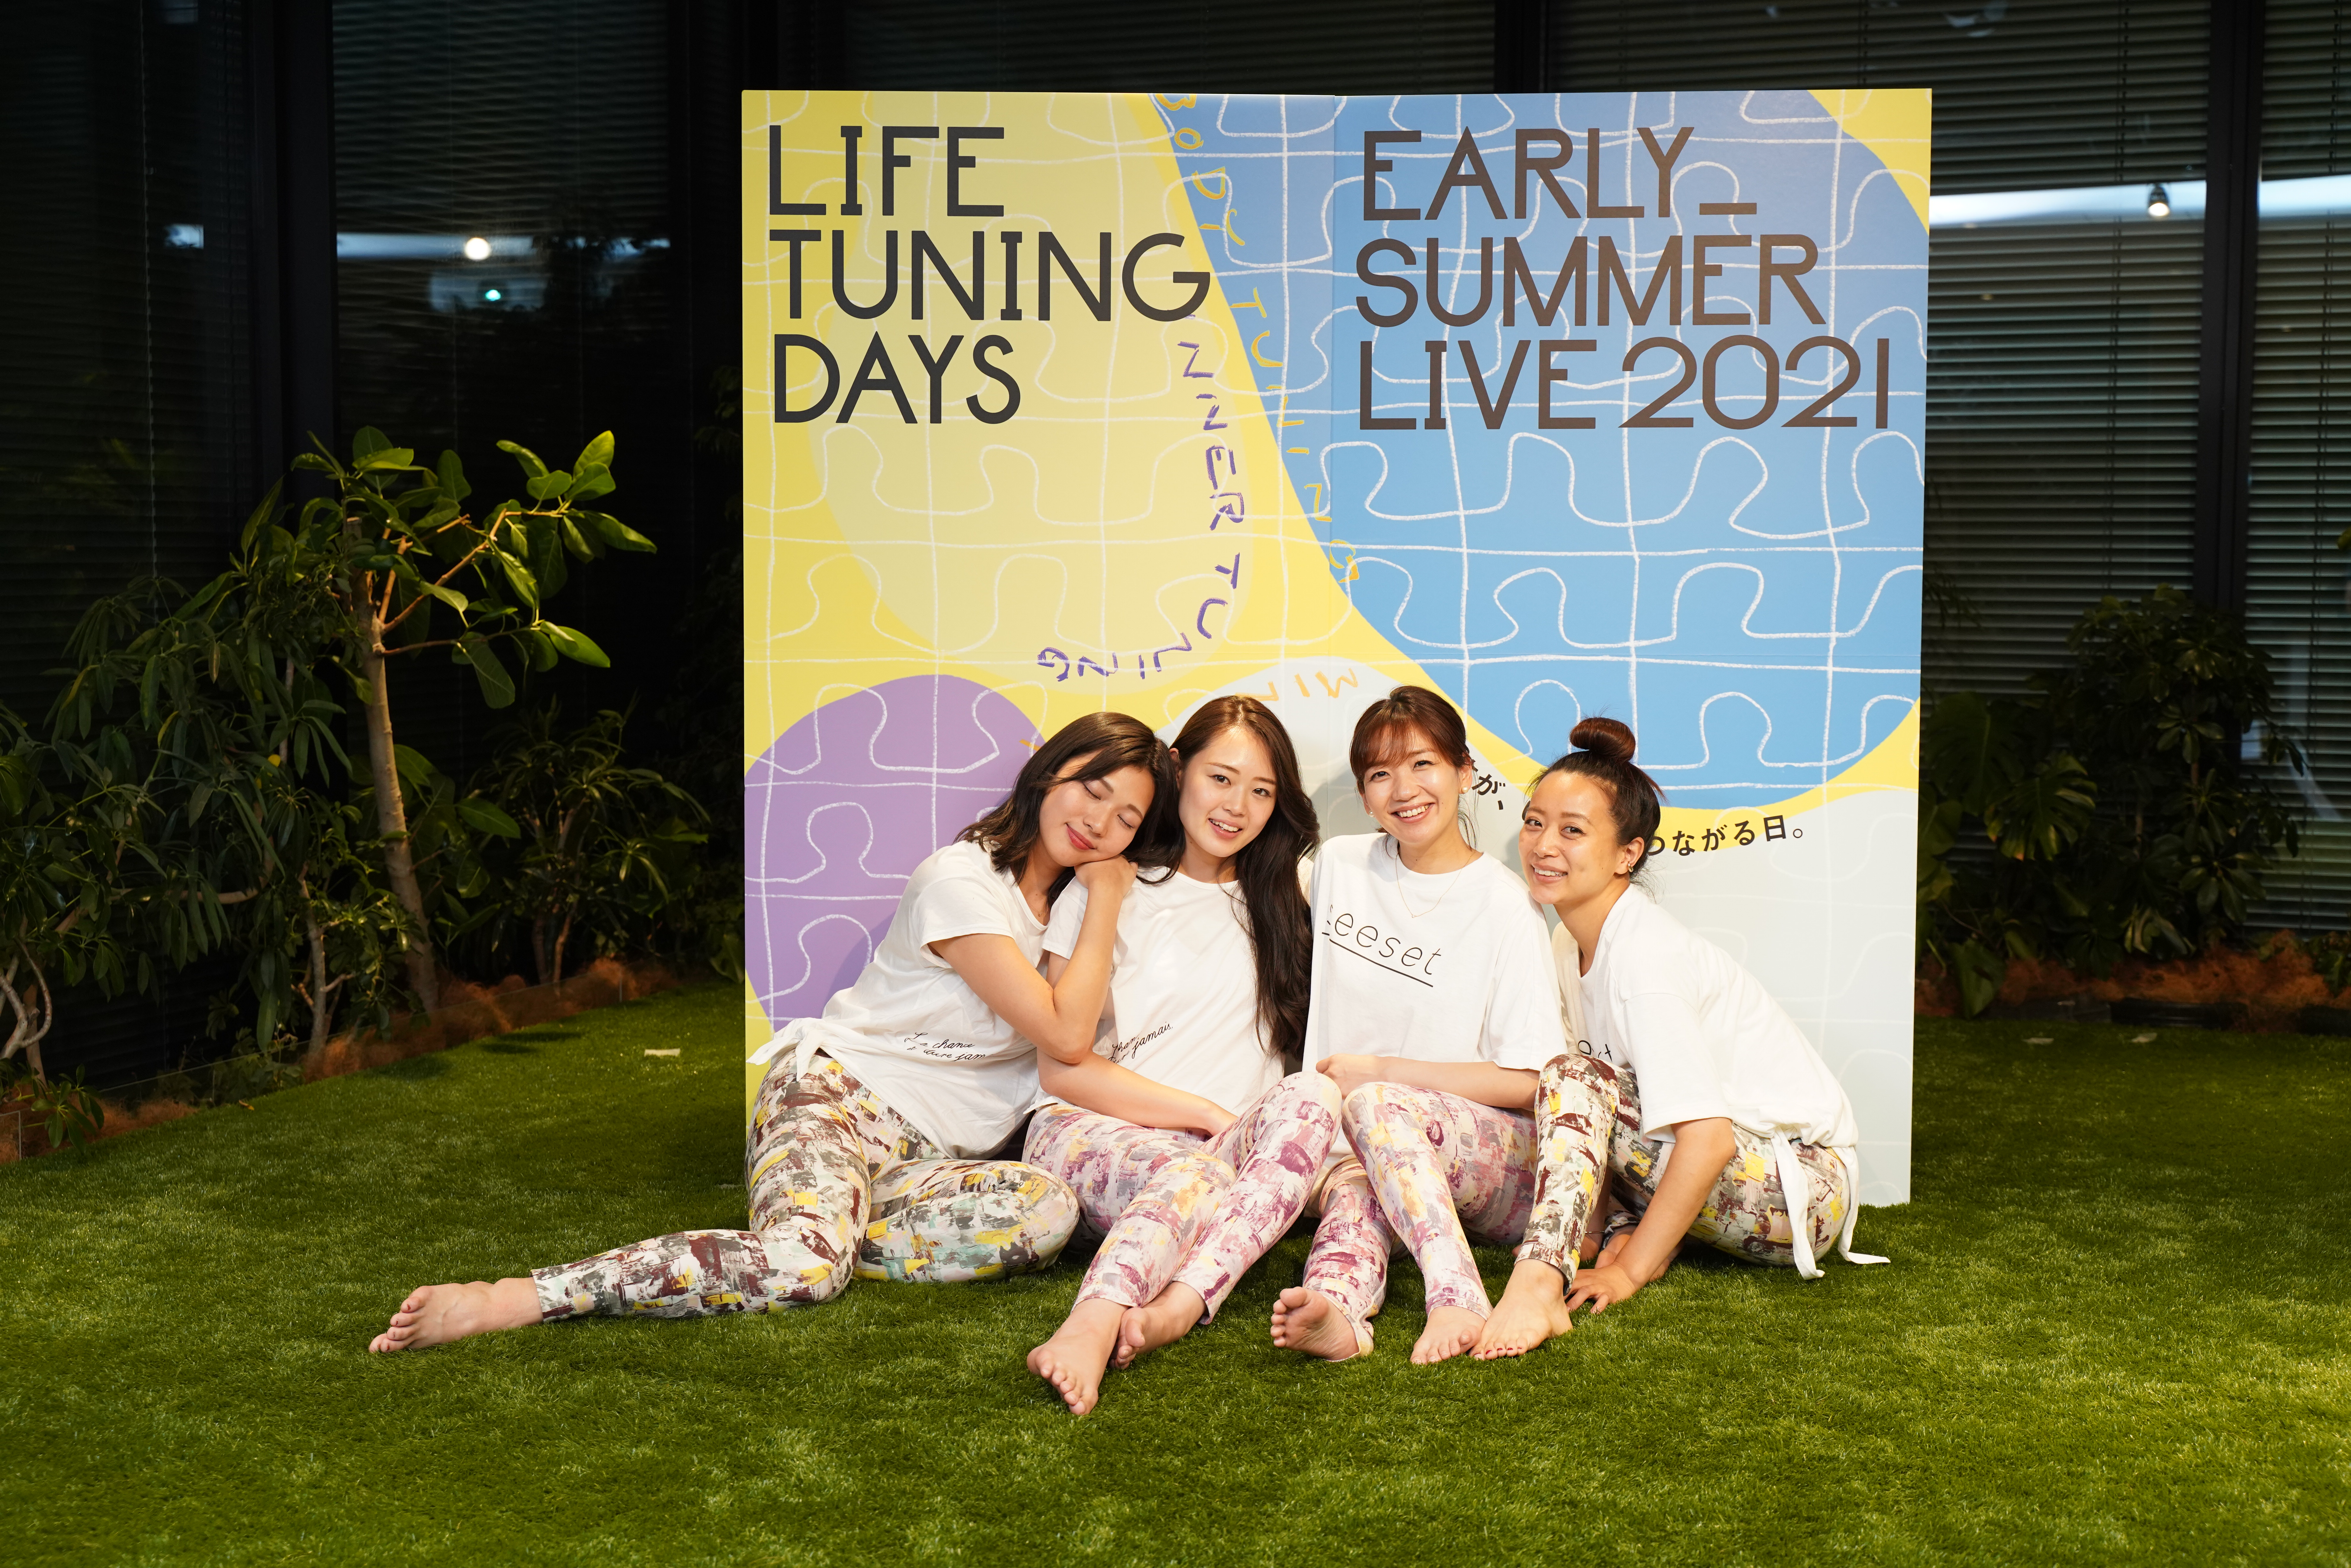 LIFE TUNING DAYS EARLY-SUMMER LIVE 2021